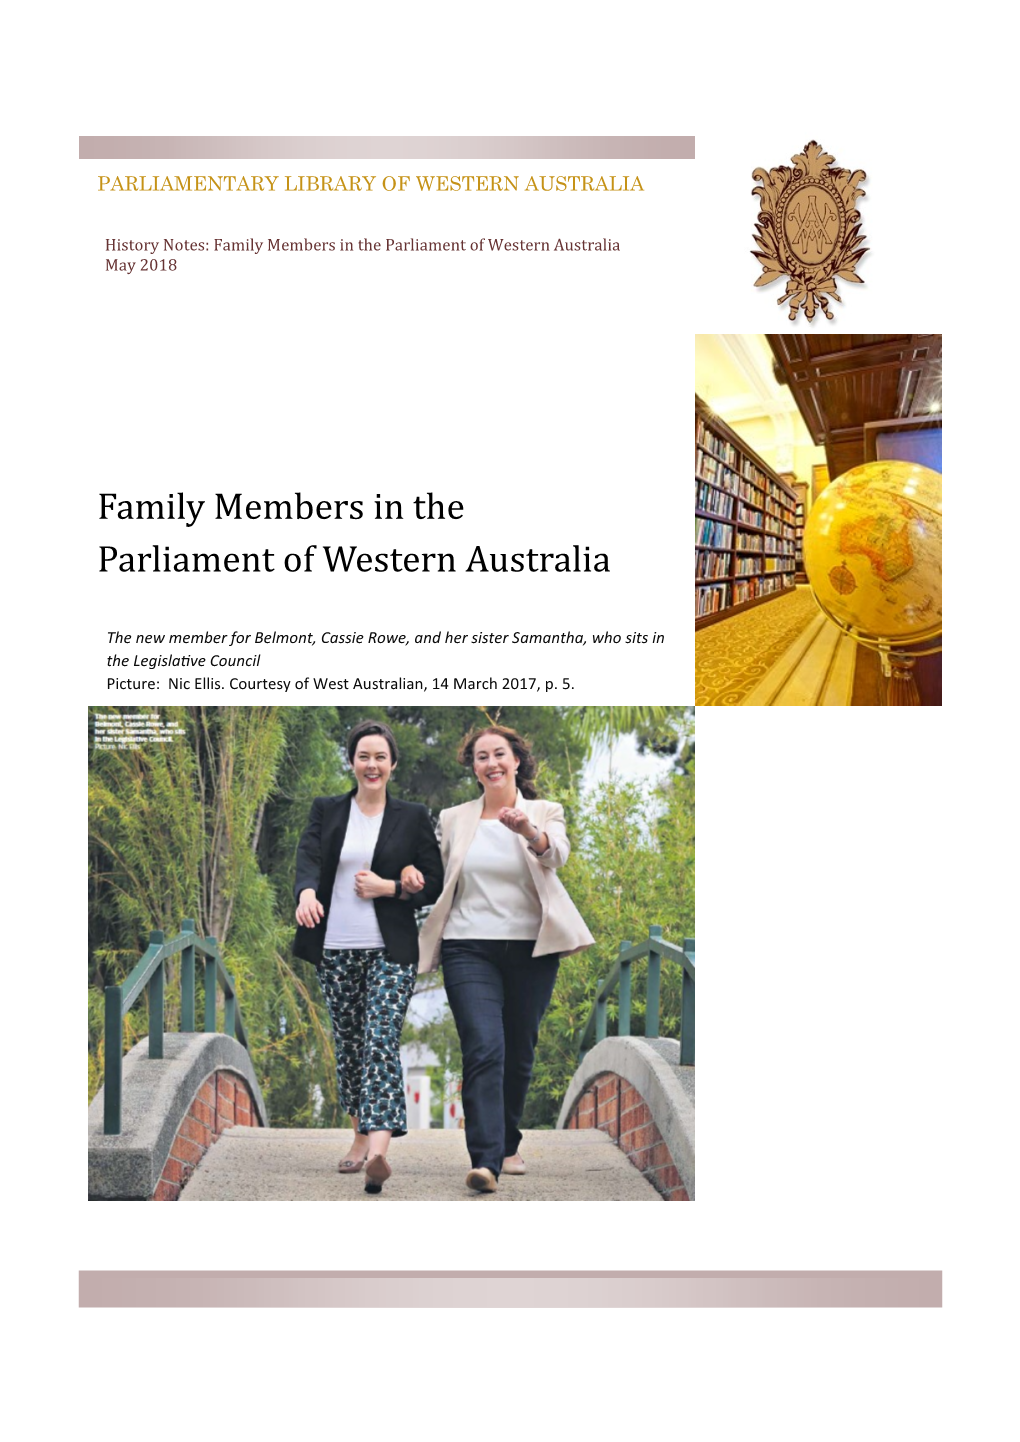 Family Members in the Parliament of Western Australia May 2018